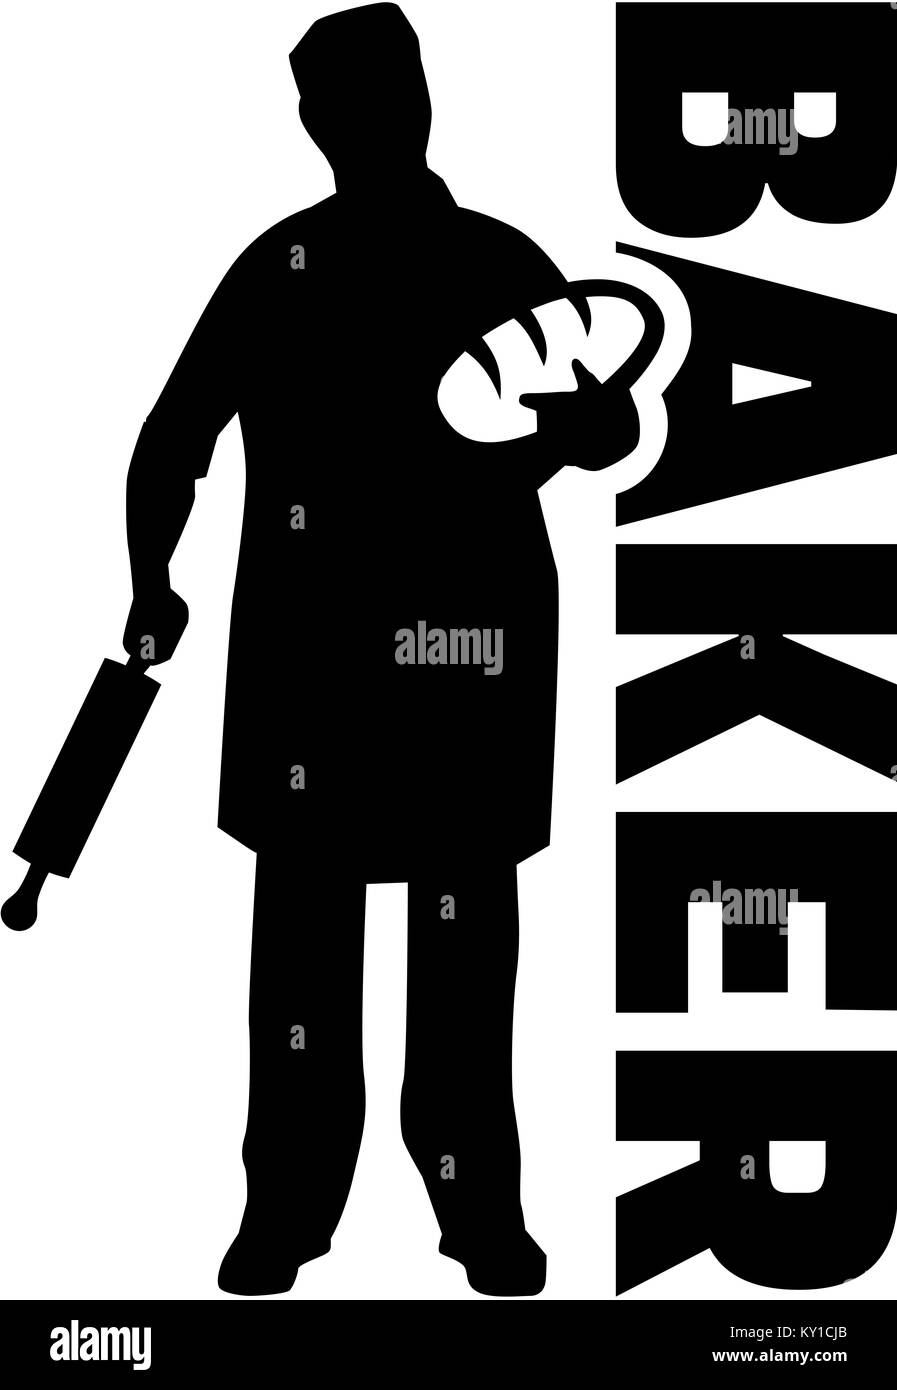 Baker silhouette with job title Stock Photo